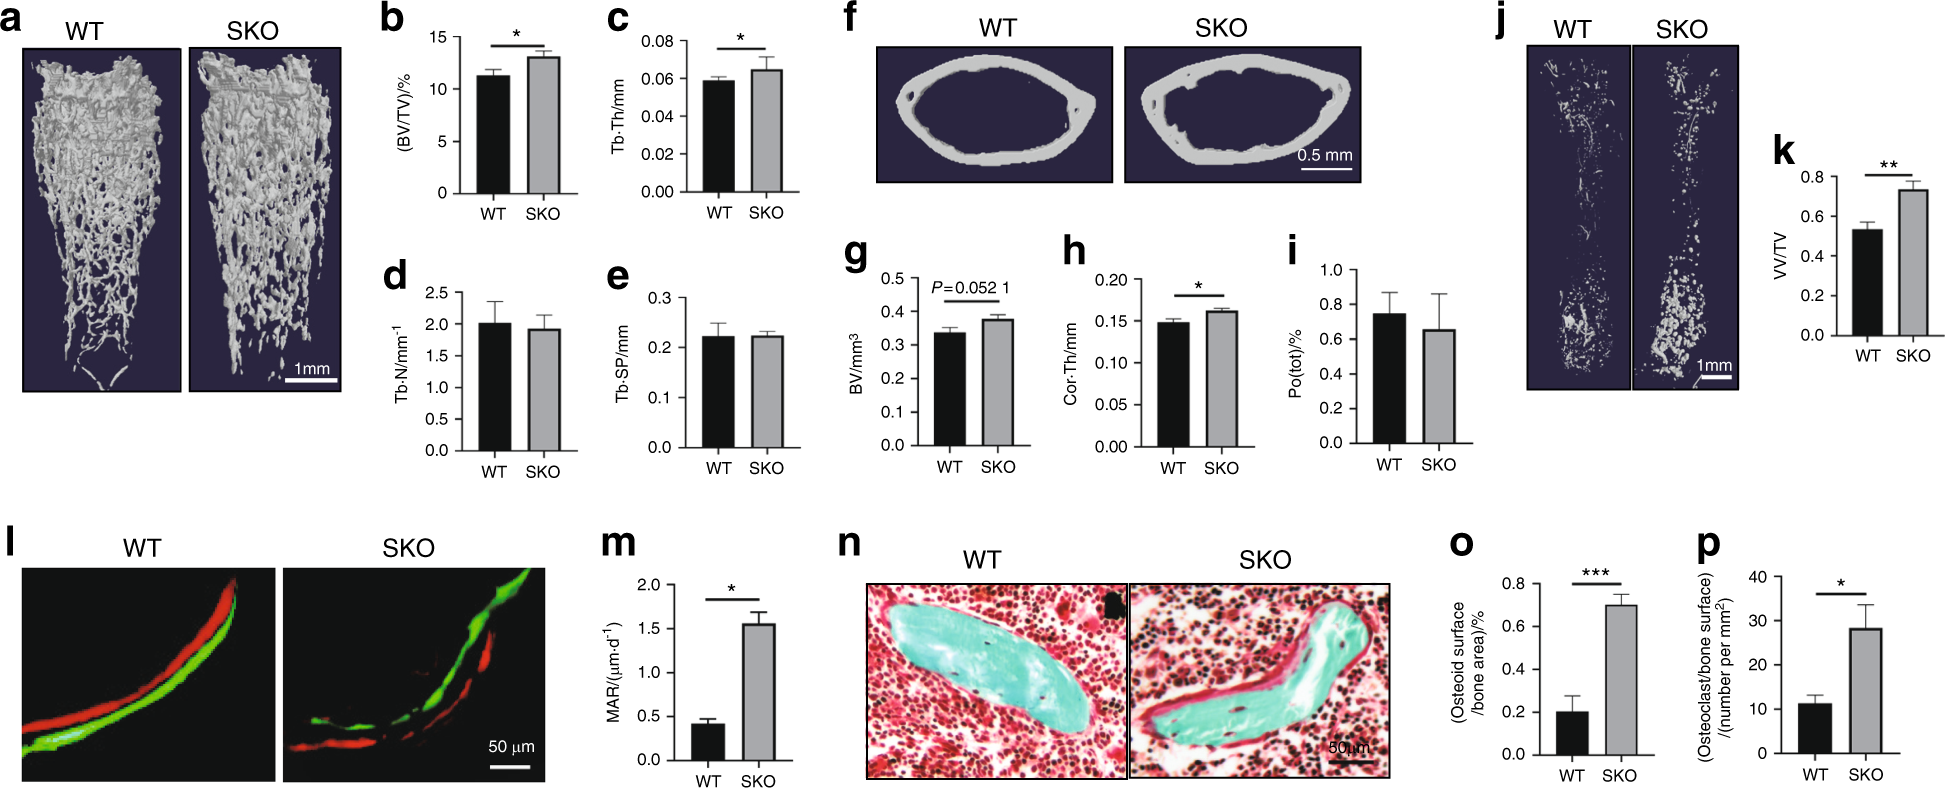 An antibody against Siglec-15 promotes bone formation and fracture healing  by increasing TRAP+ mononuclear cells and PDGF-BB secretion | Bone Research